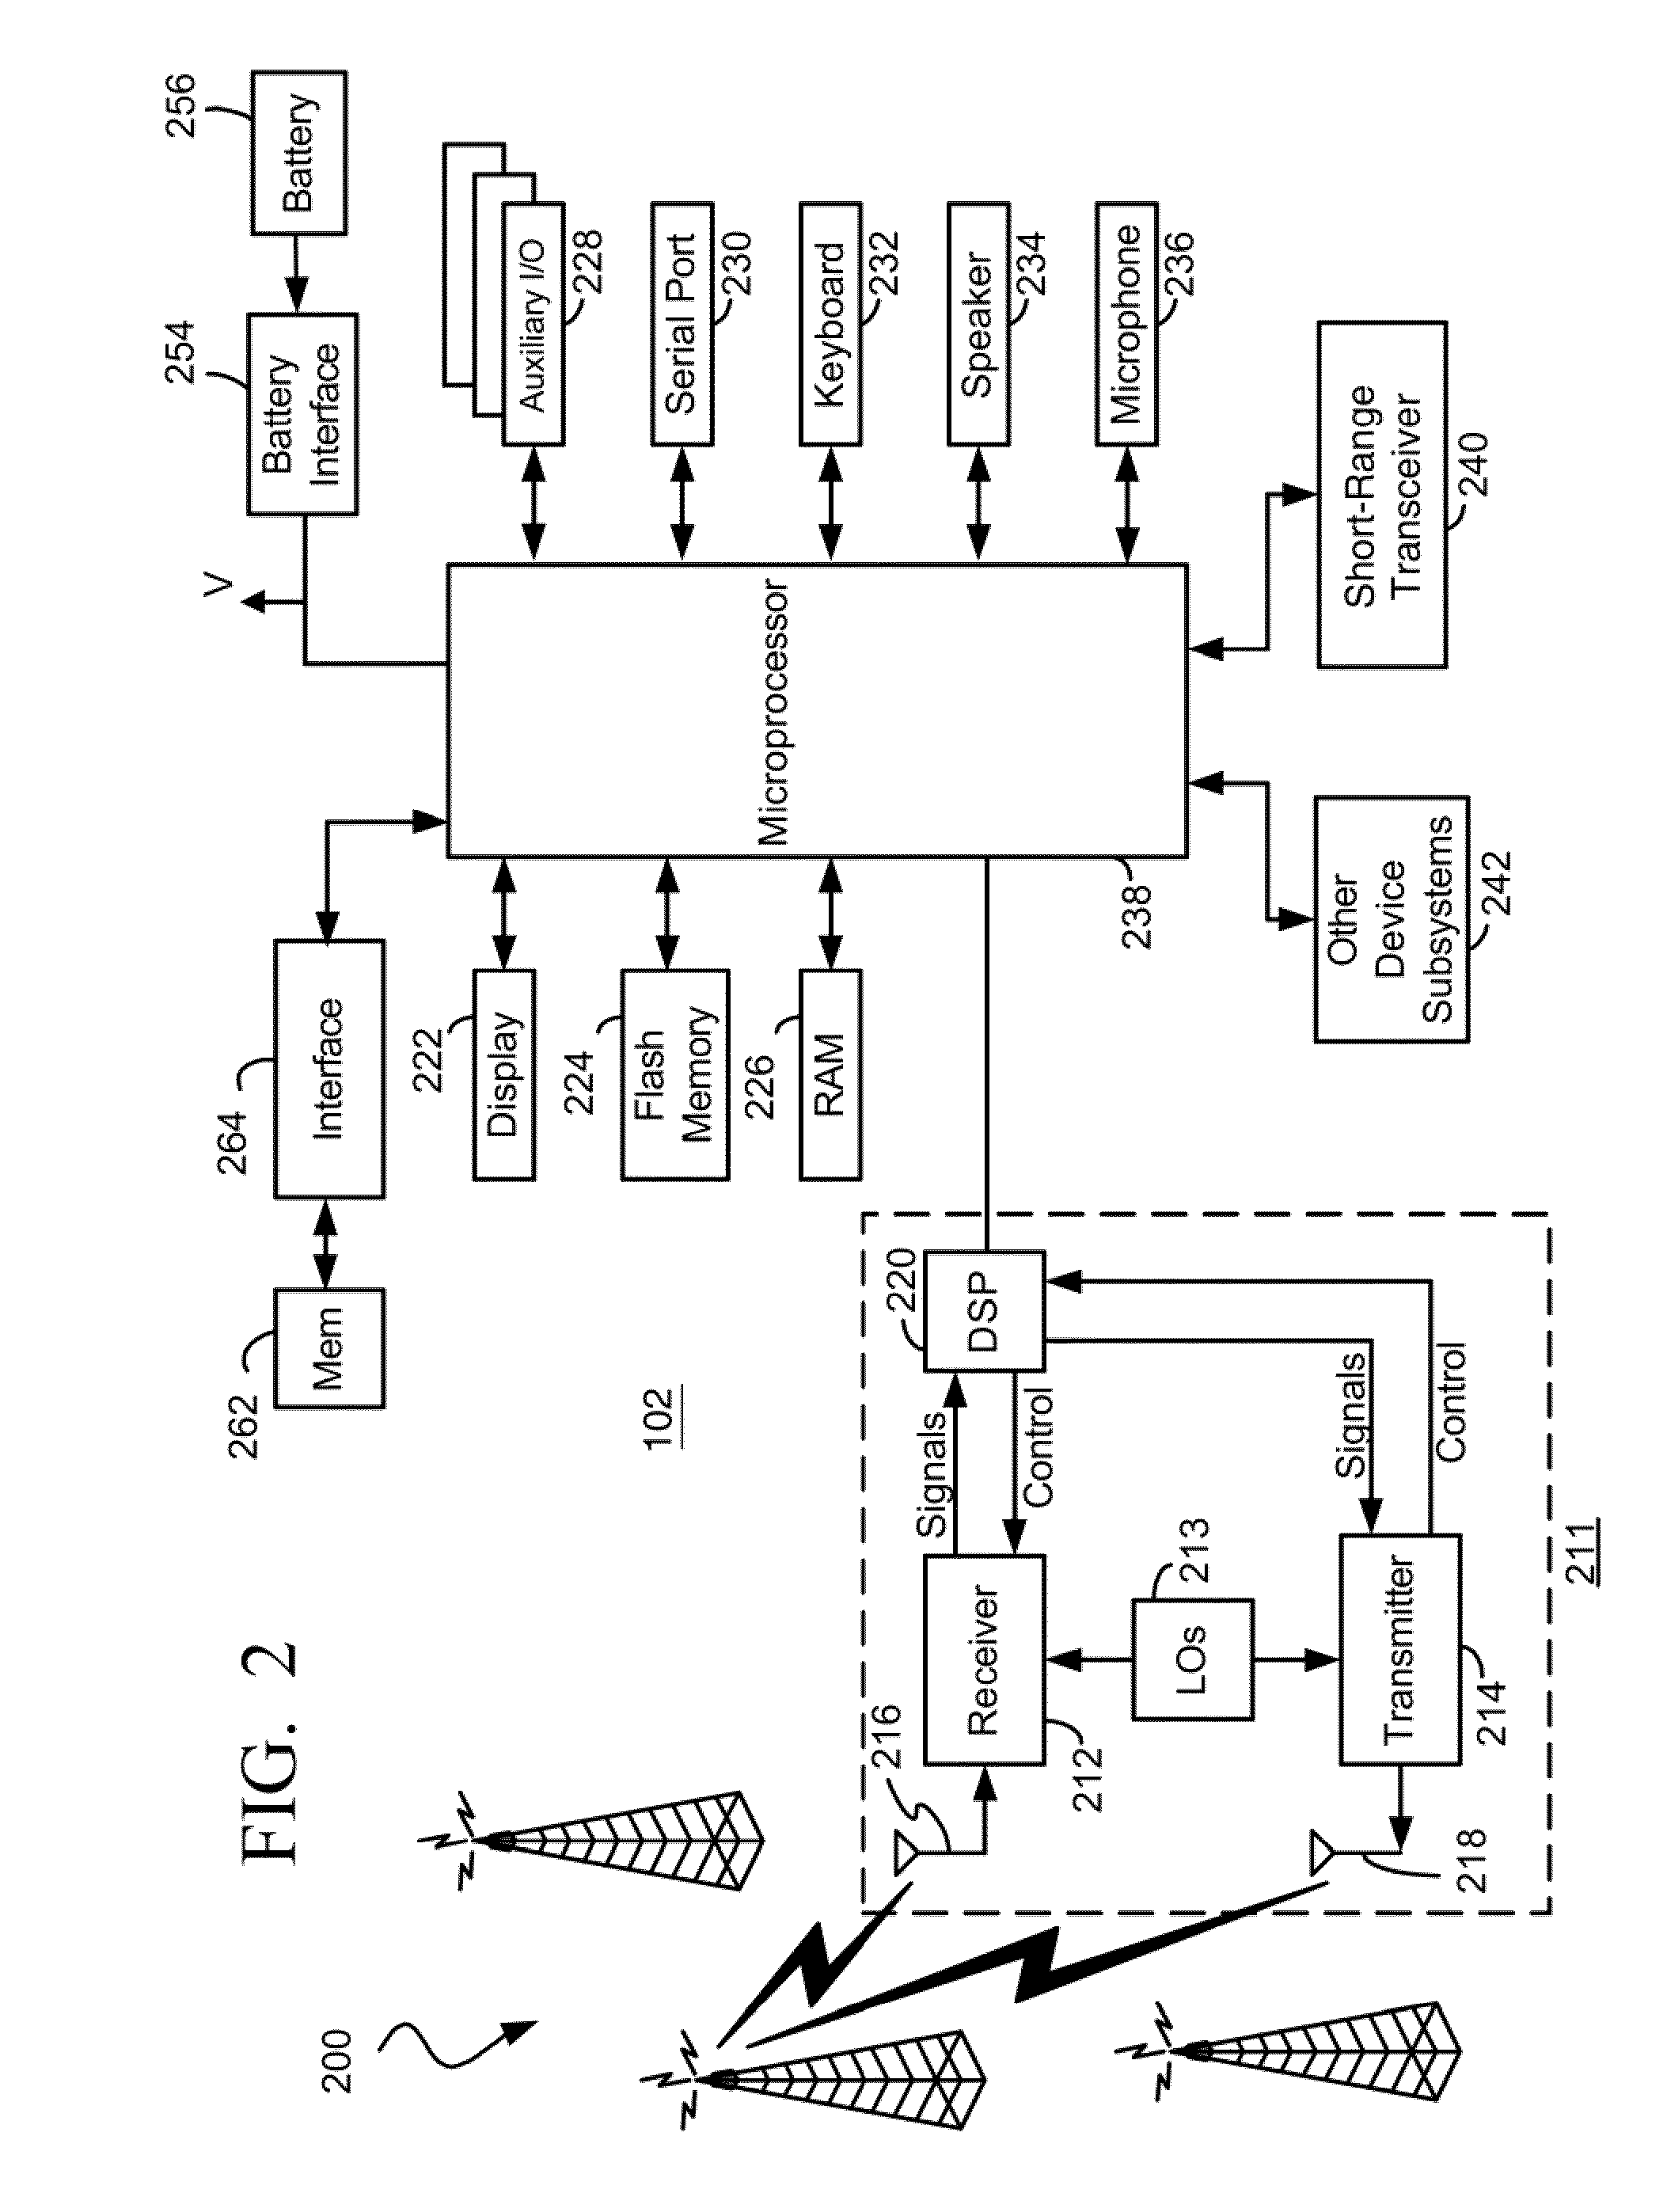 Methods And Apparatus For Use In Selectively Retrieving And Displaying User Interface Information Of A Wireless Peripheral Device